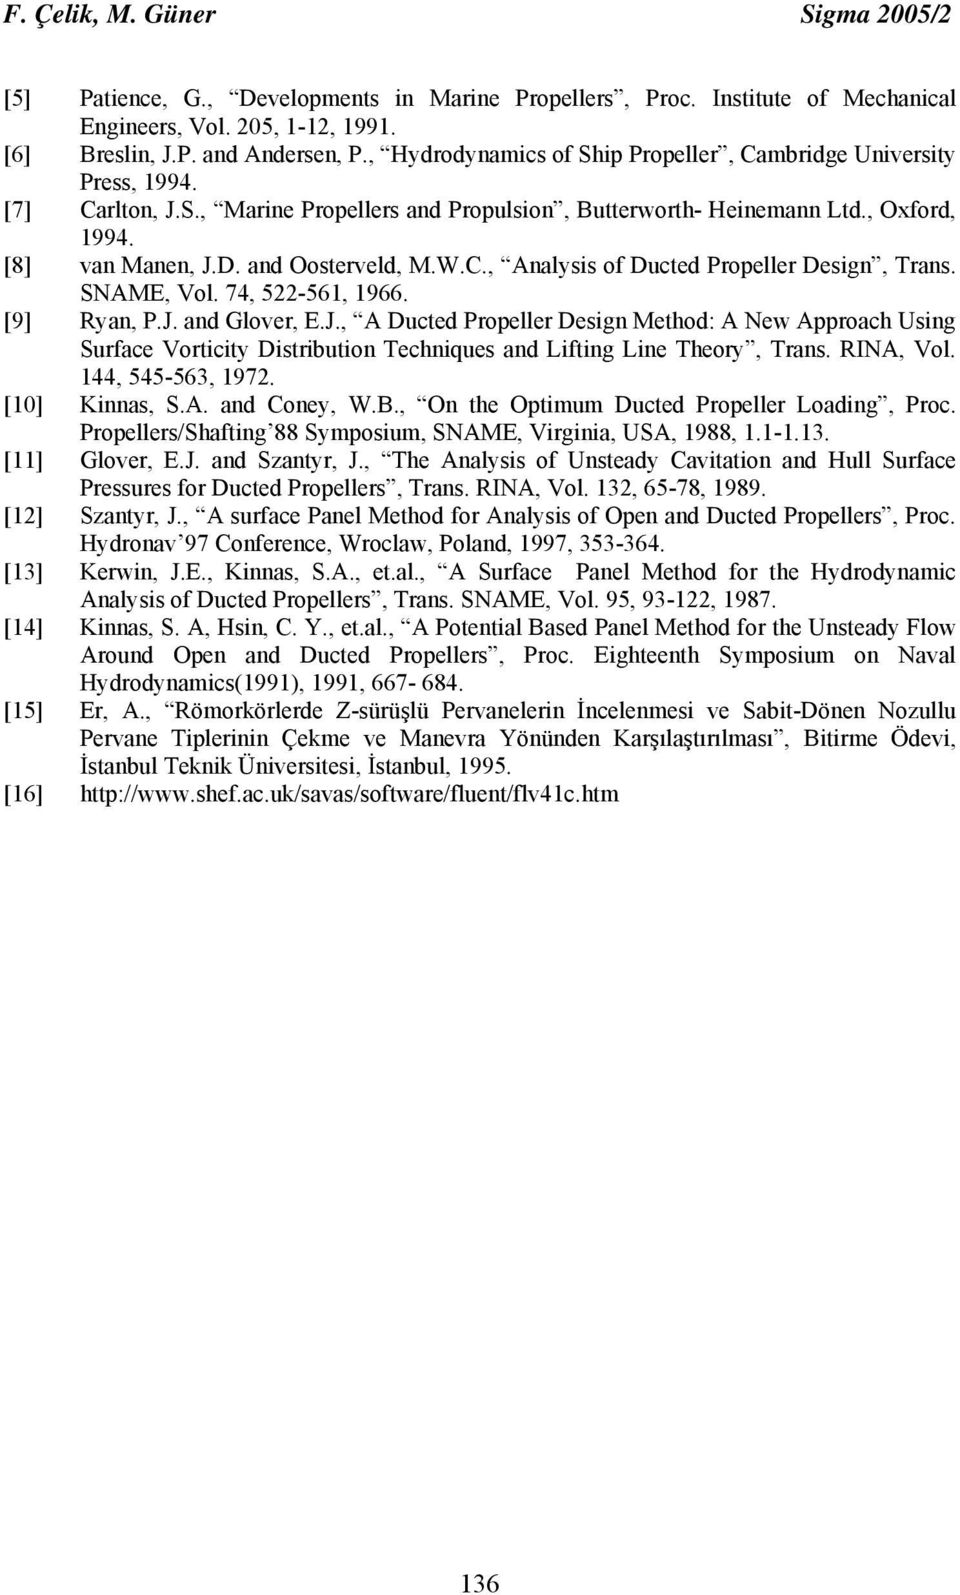 and Oosterveld, M.W.C., Analysis of Ducted Propeller Design, Trans. SNAME, Vol. 74, 522-561, 1966. [9] Ryan, P.J.